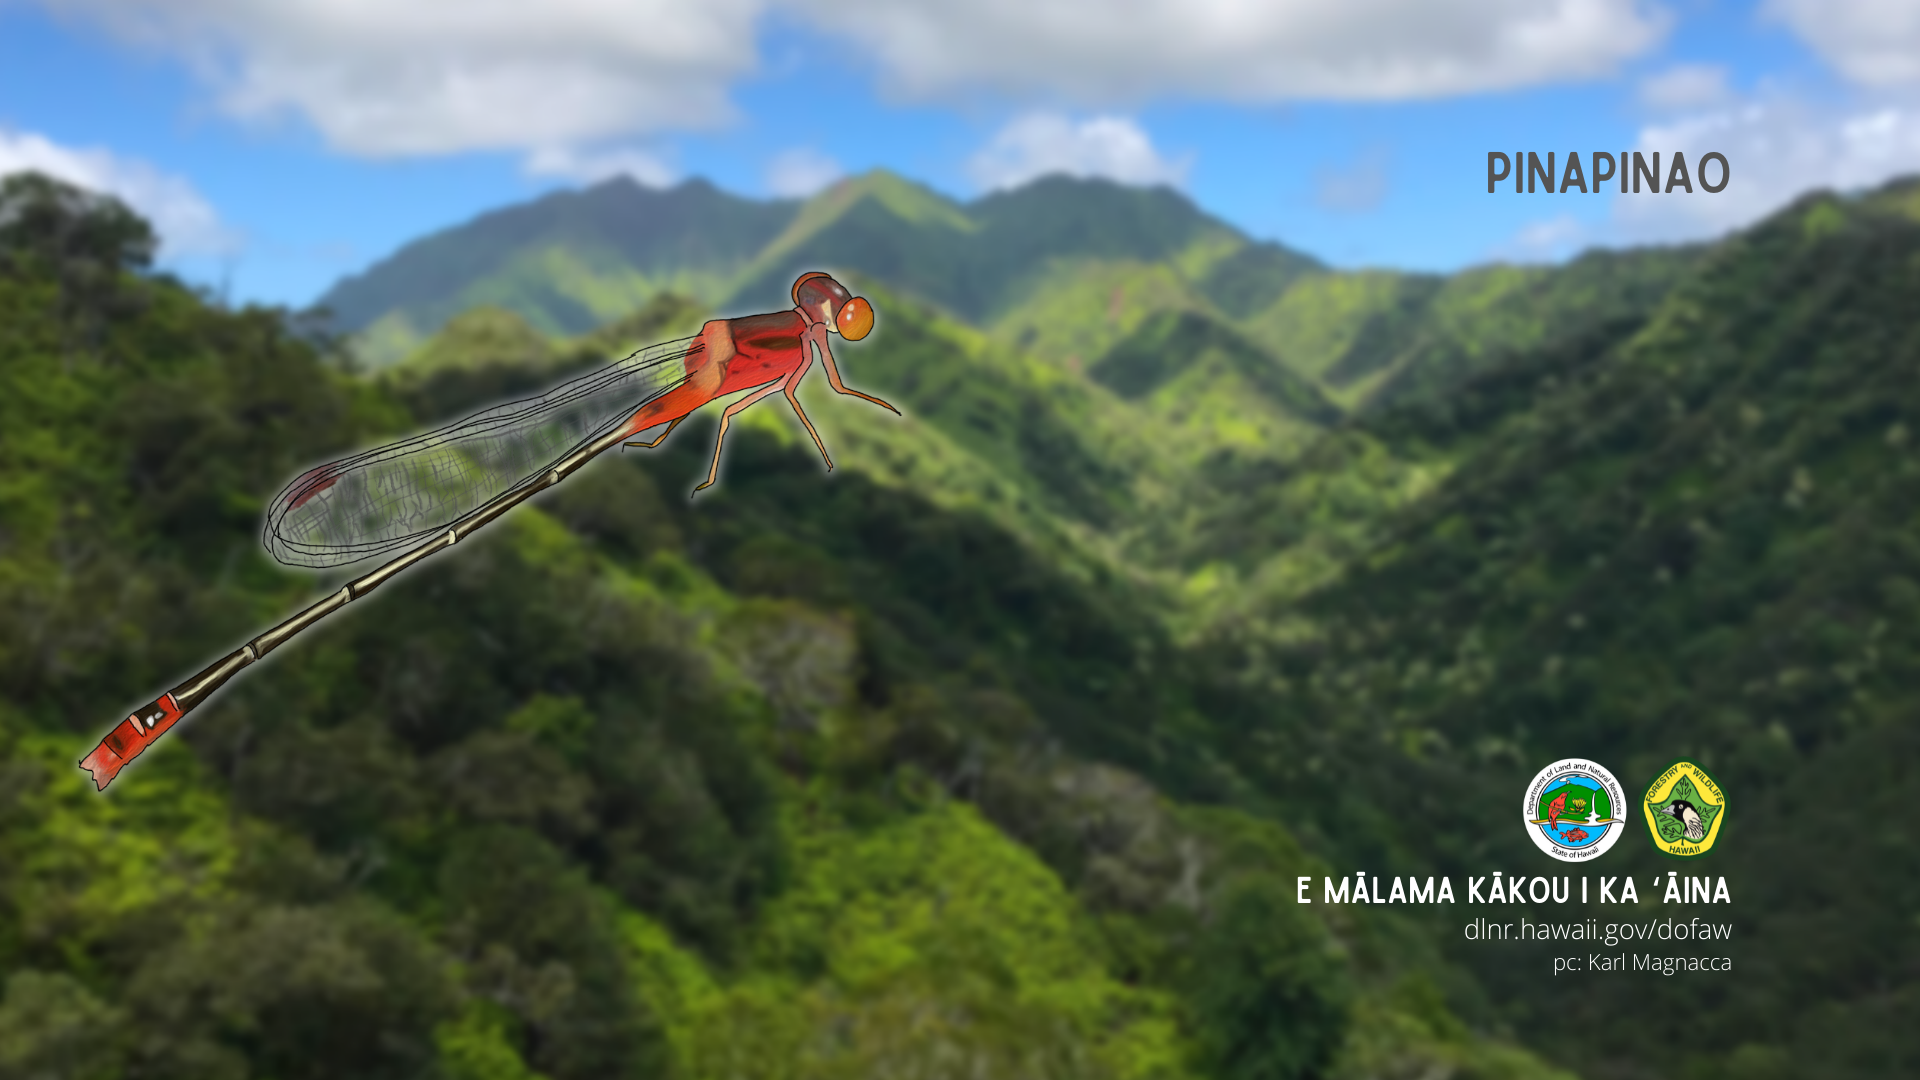 A pinapinao damselfly background